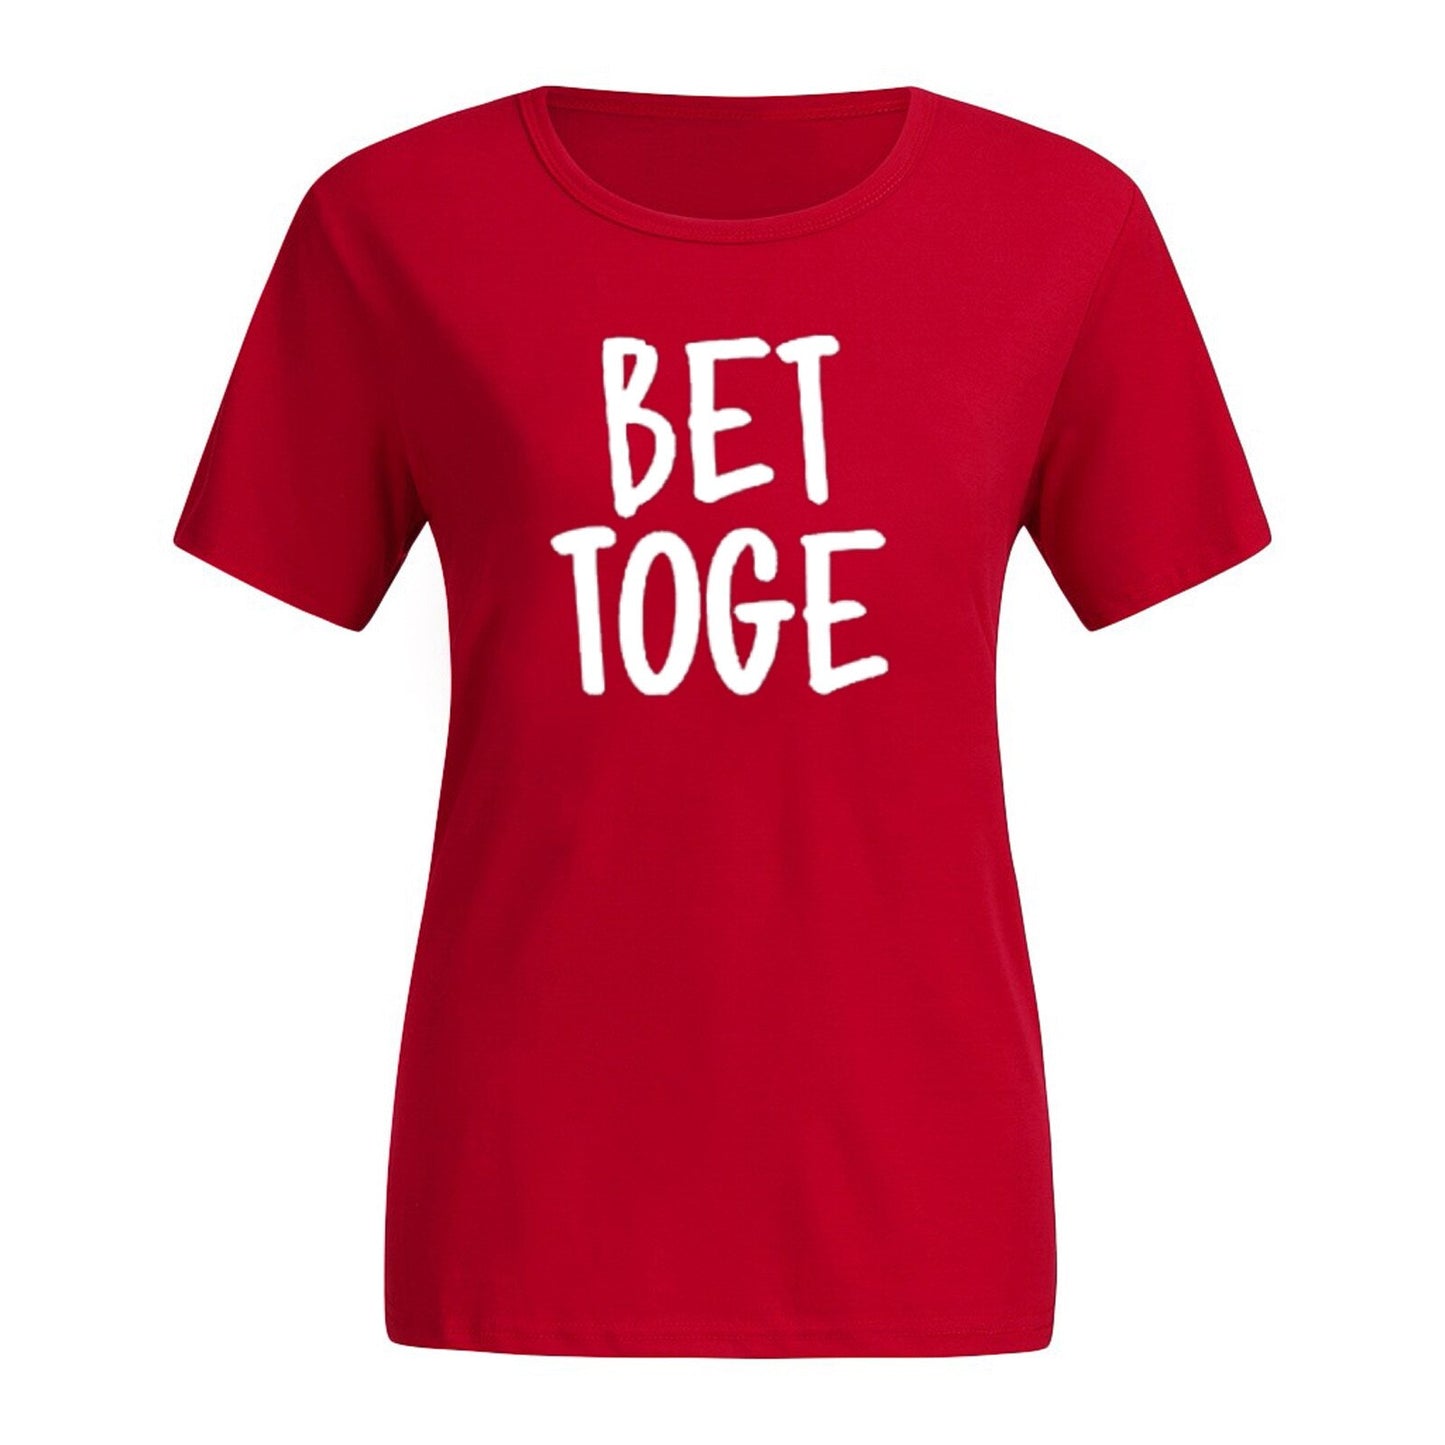 "Better Together" Couples T-Shirts